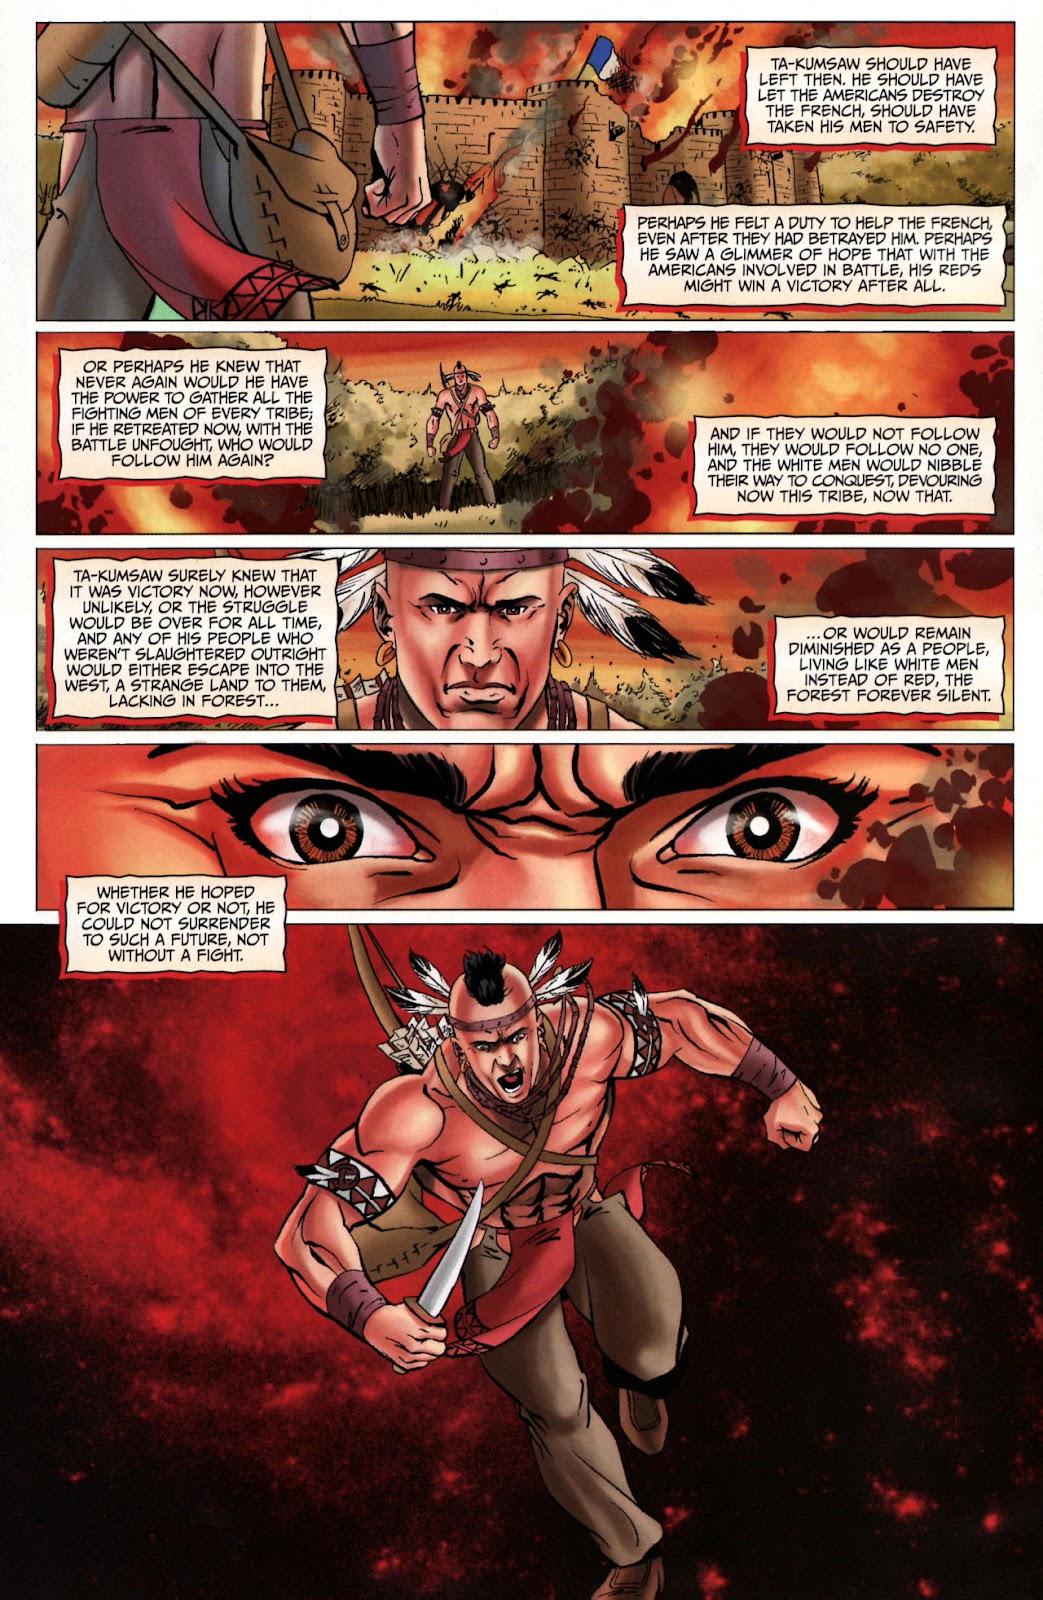 Red Prophet: The Tales of Alvin Maker issue 12 - Page 15